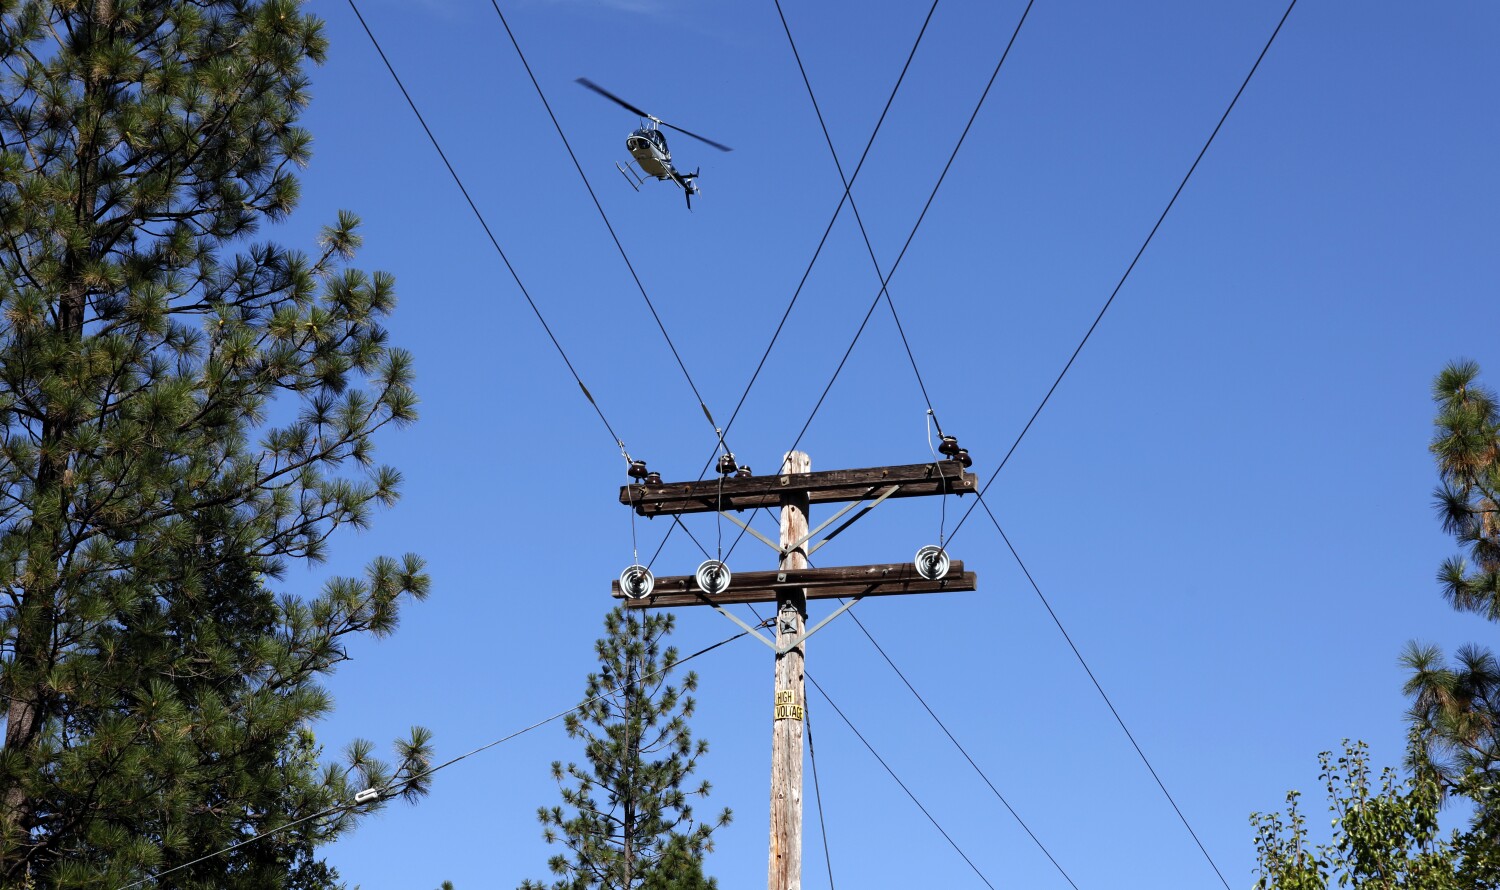 PG&E cited over use of 'heli-saw' in Bay Area park, safety concerns raised  